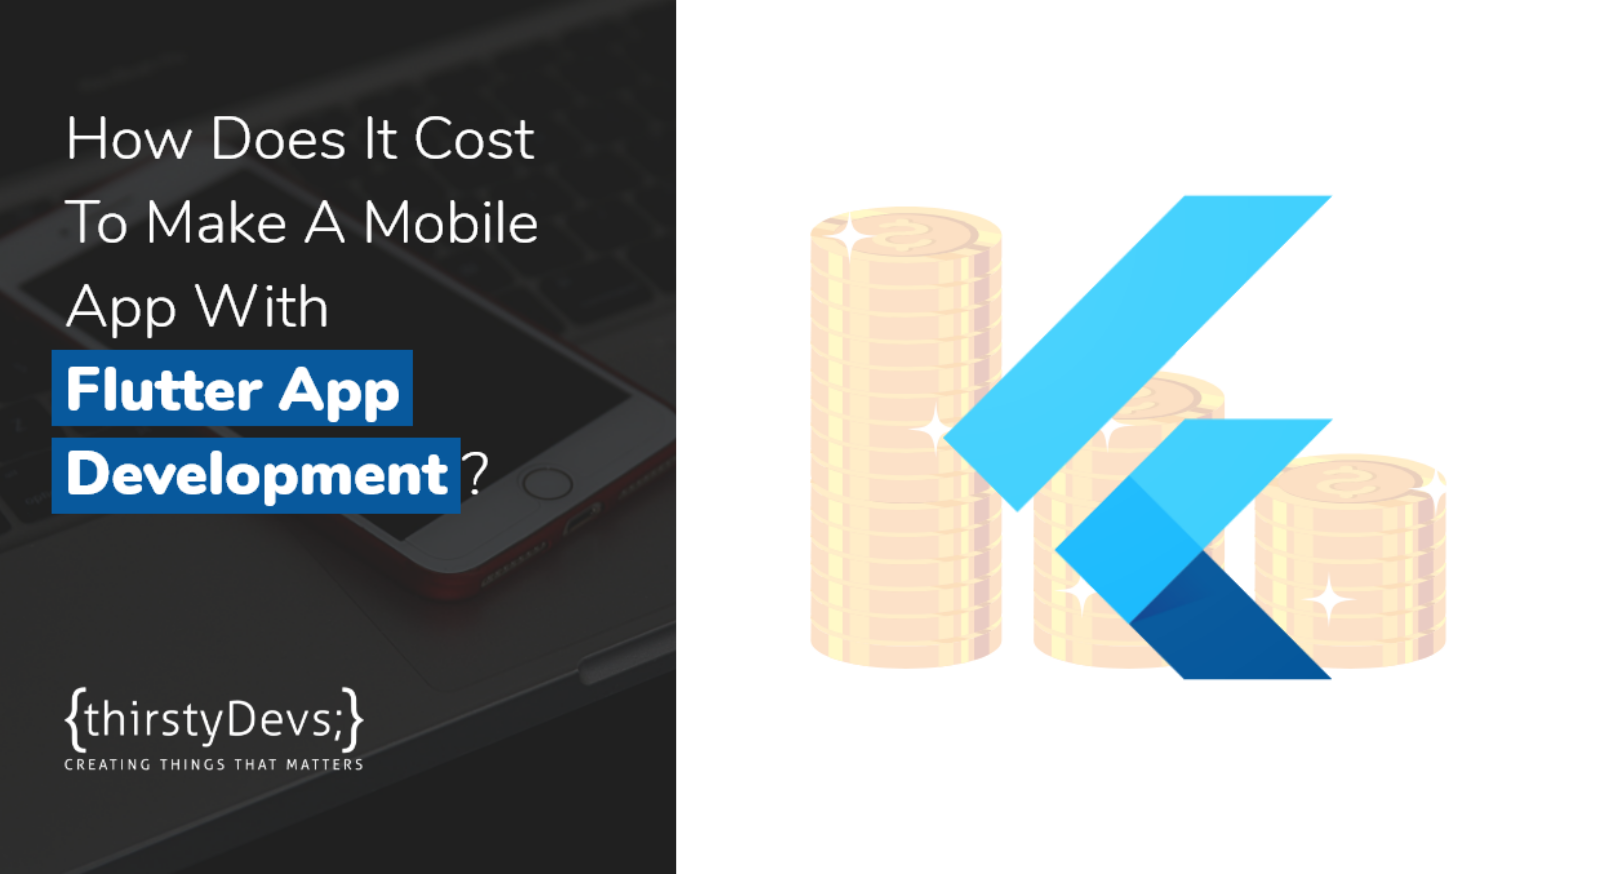 How Does It Cost To Make a Mobile App With Flutter App Development?